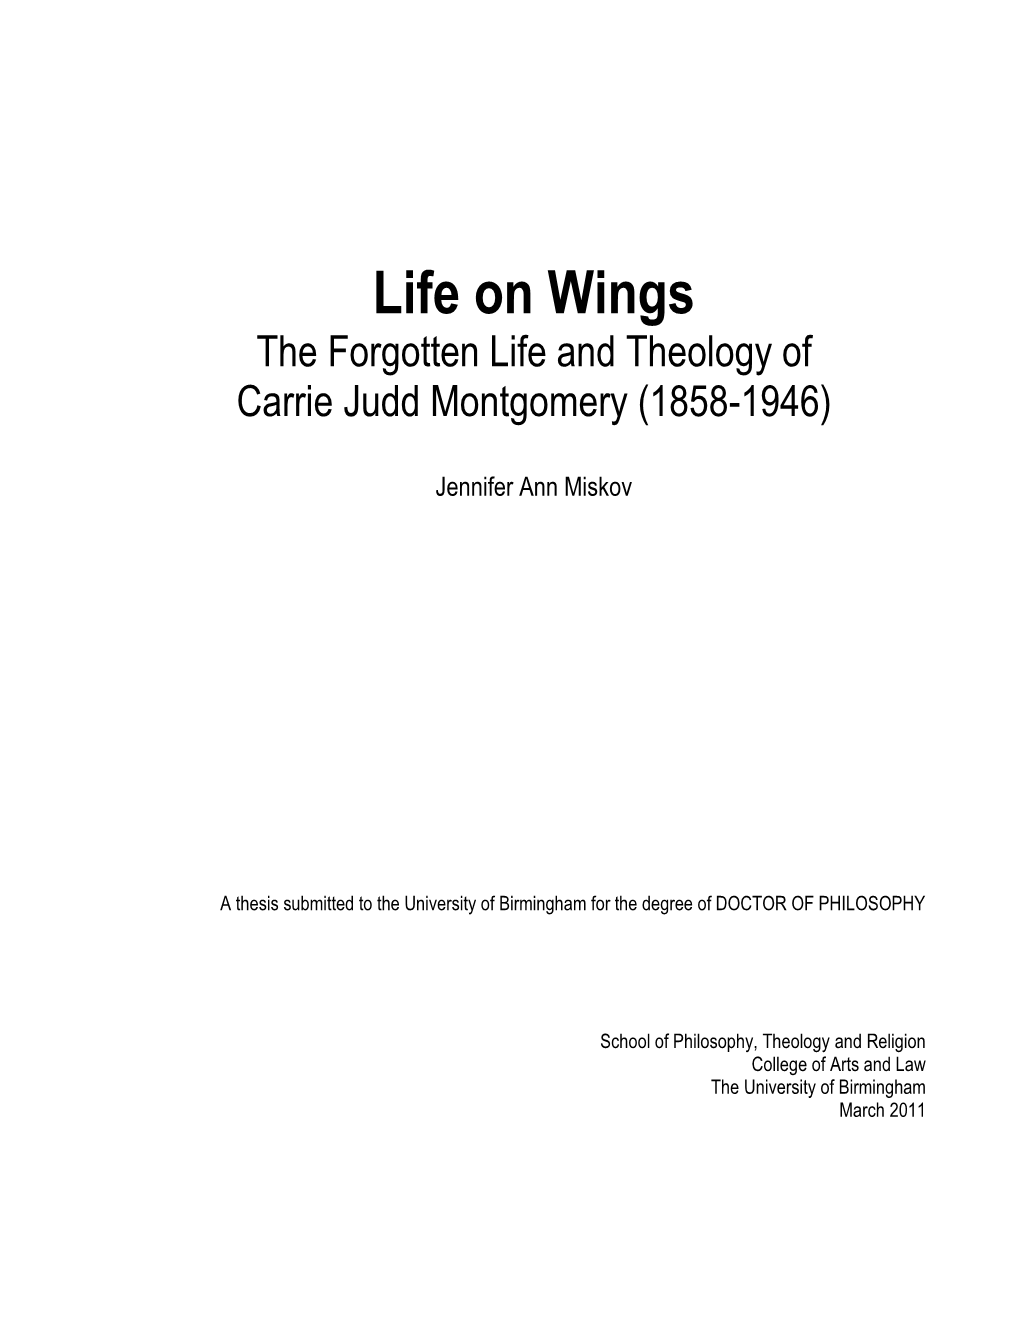 Life on Wings the Forgotten Life and Theology of Carrie Judd Montgomery (1858-1946)